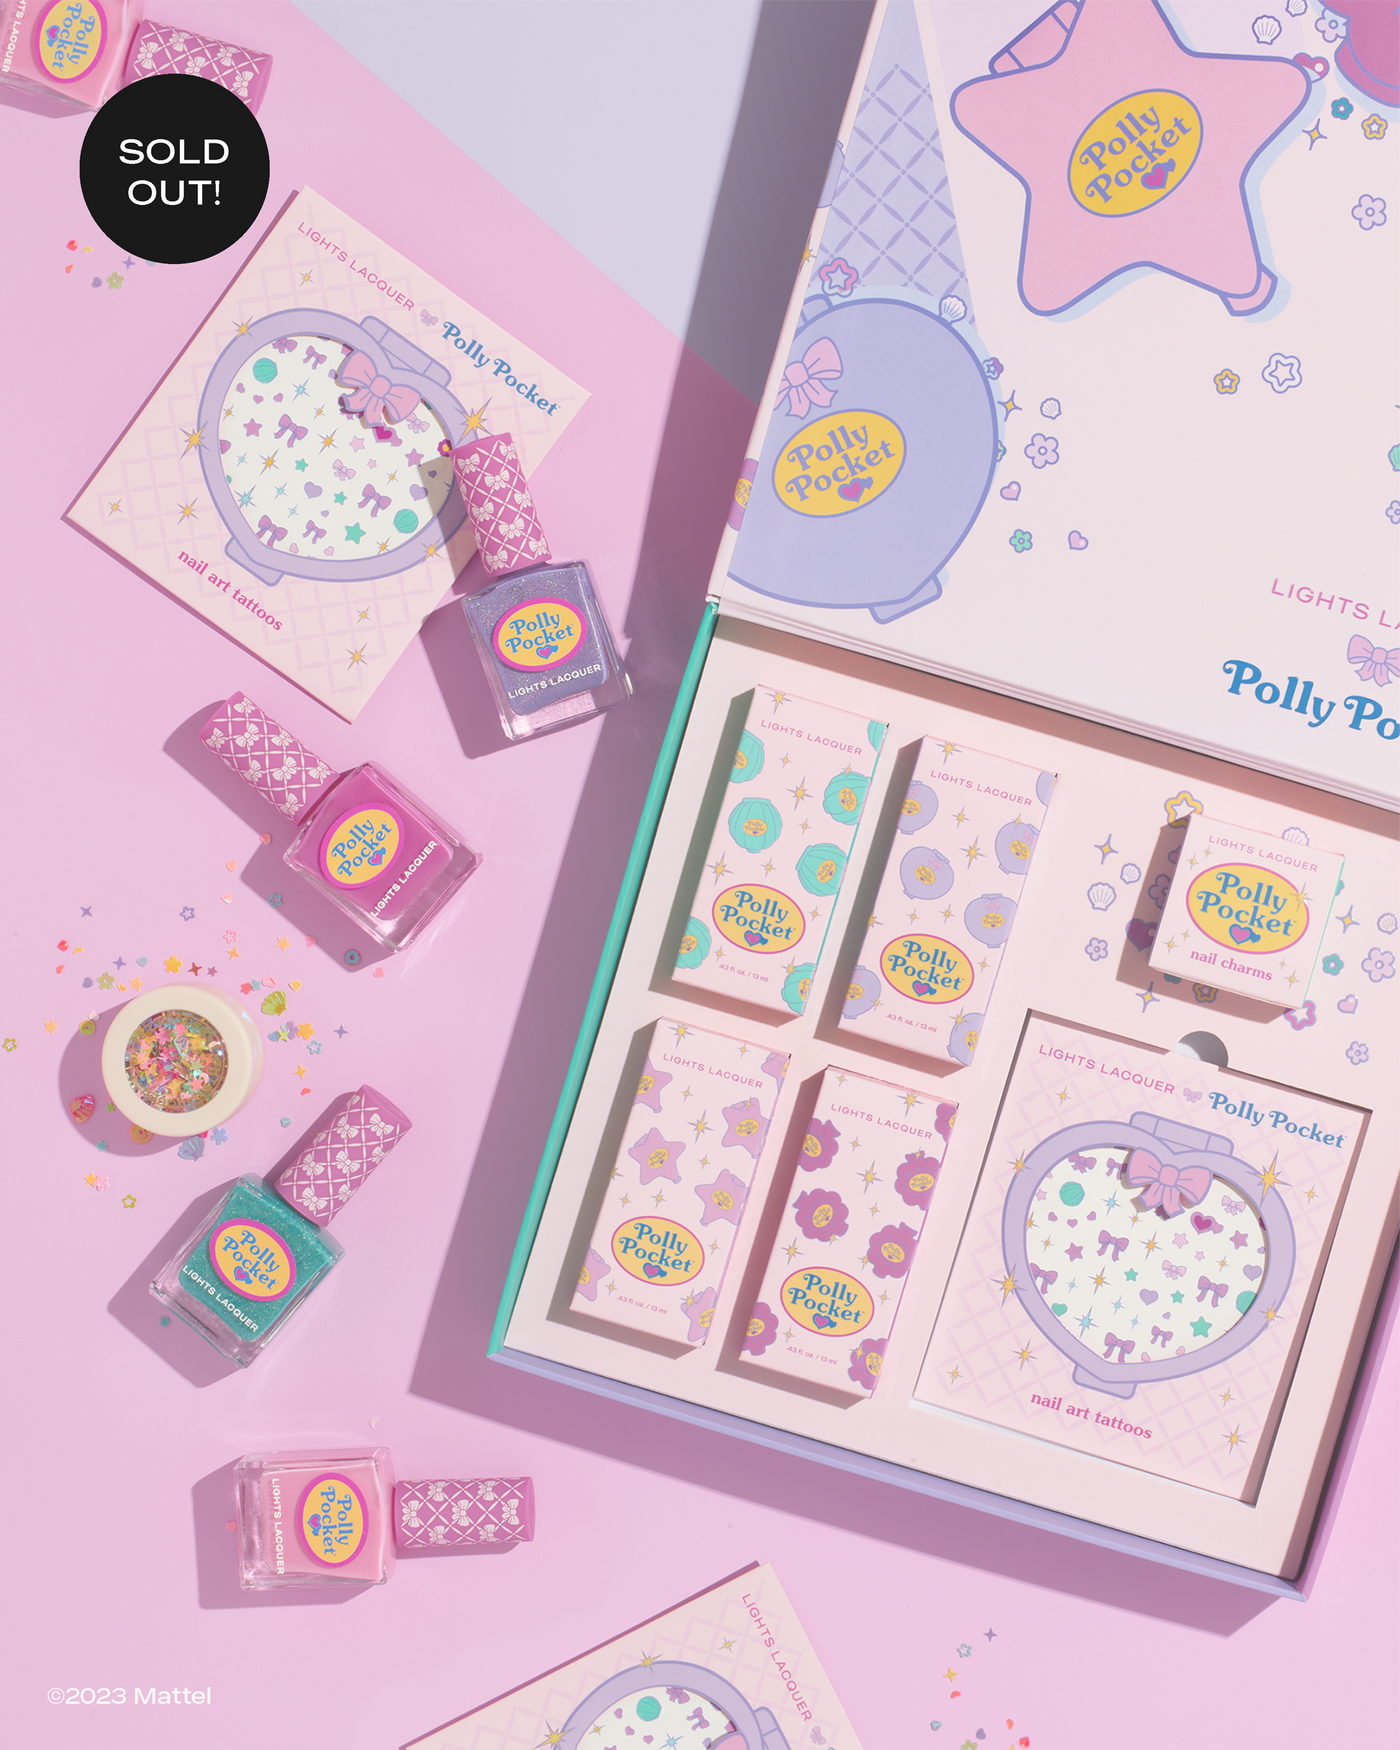 Polly Pocket™ x Lights Lacquer Collector’s Edition